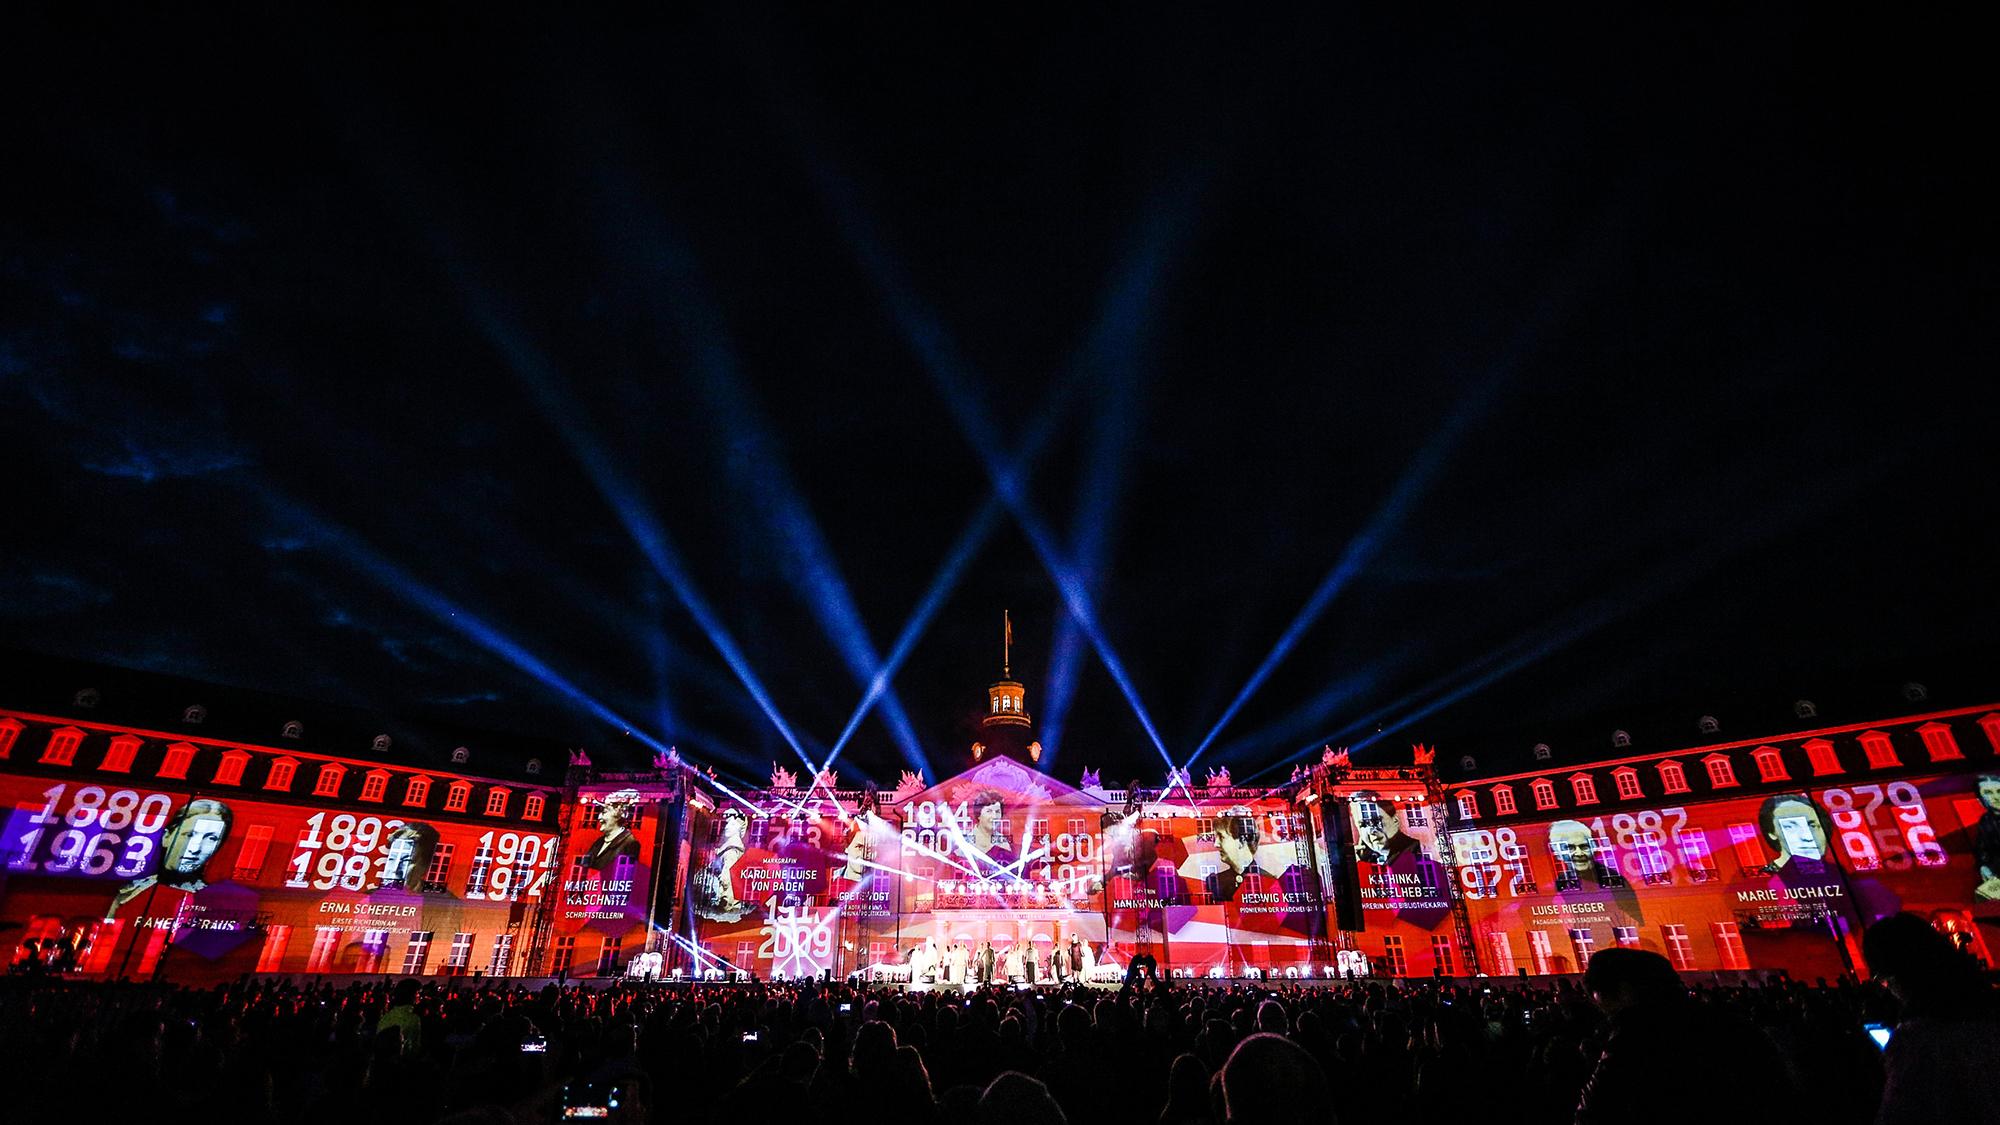 Video mapping of Karlsruhe's history is projected onto a building as a large crowd watches on.